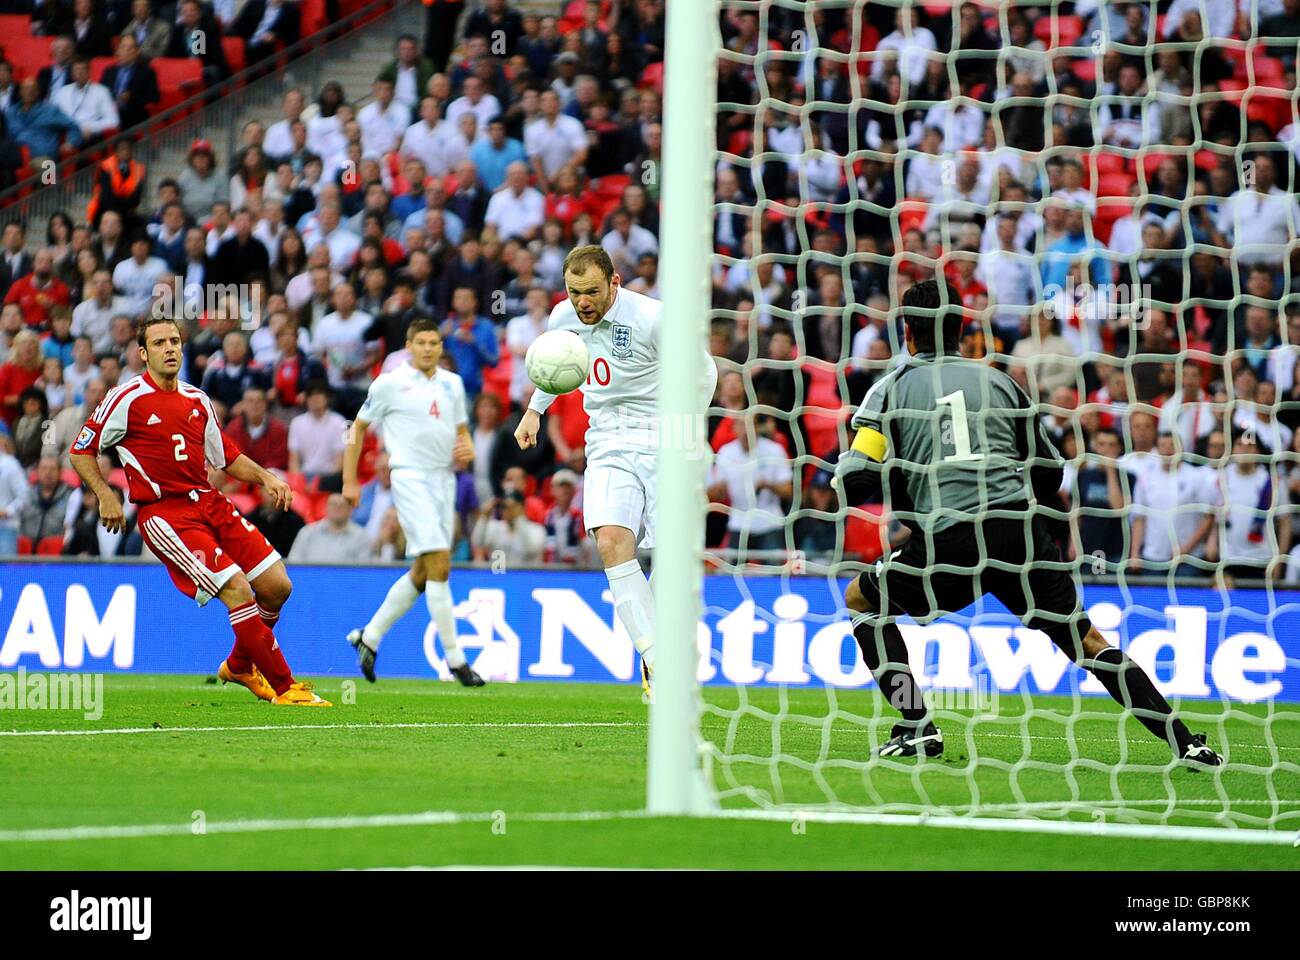 Soccer - Fifa World Cup 2010 - Qualifying Round - Group Six - England v Andorra - Wembley Stadium. England's Wayne Rooney (centre) scores his sides first goal of the game Stock Photo